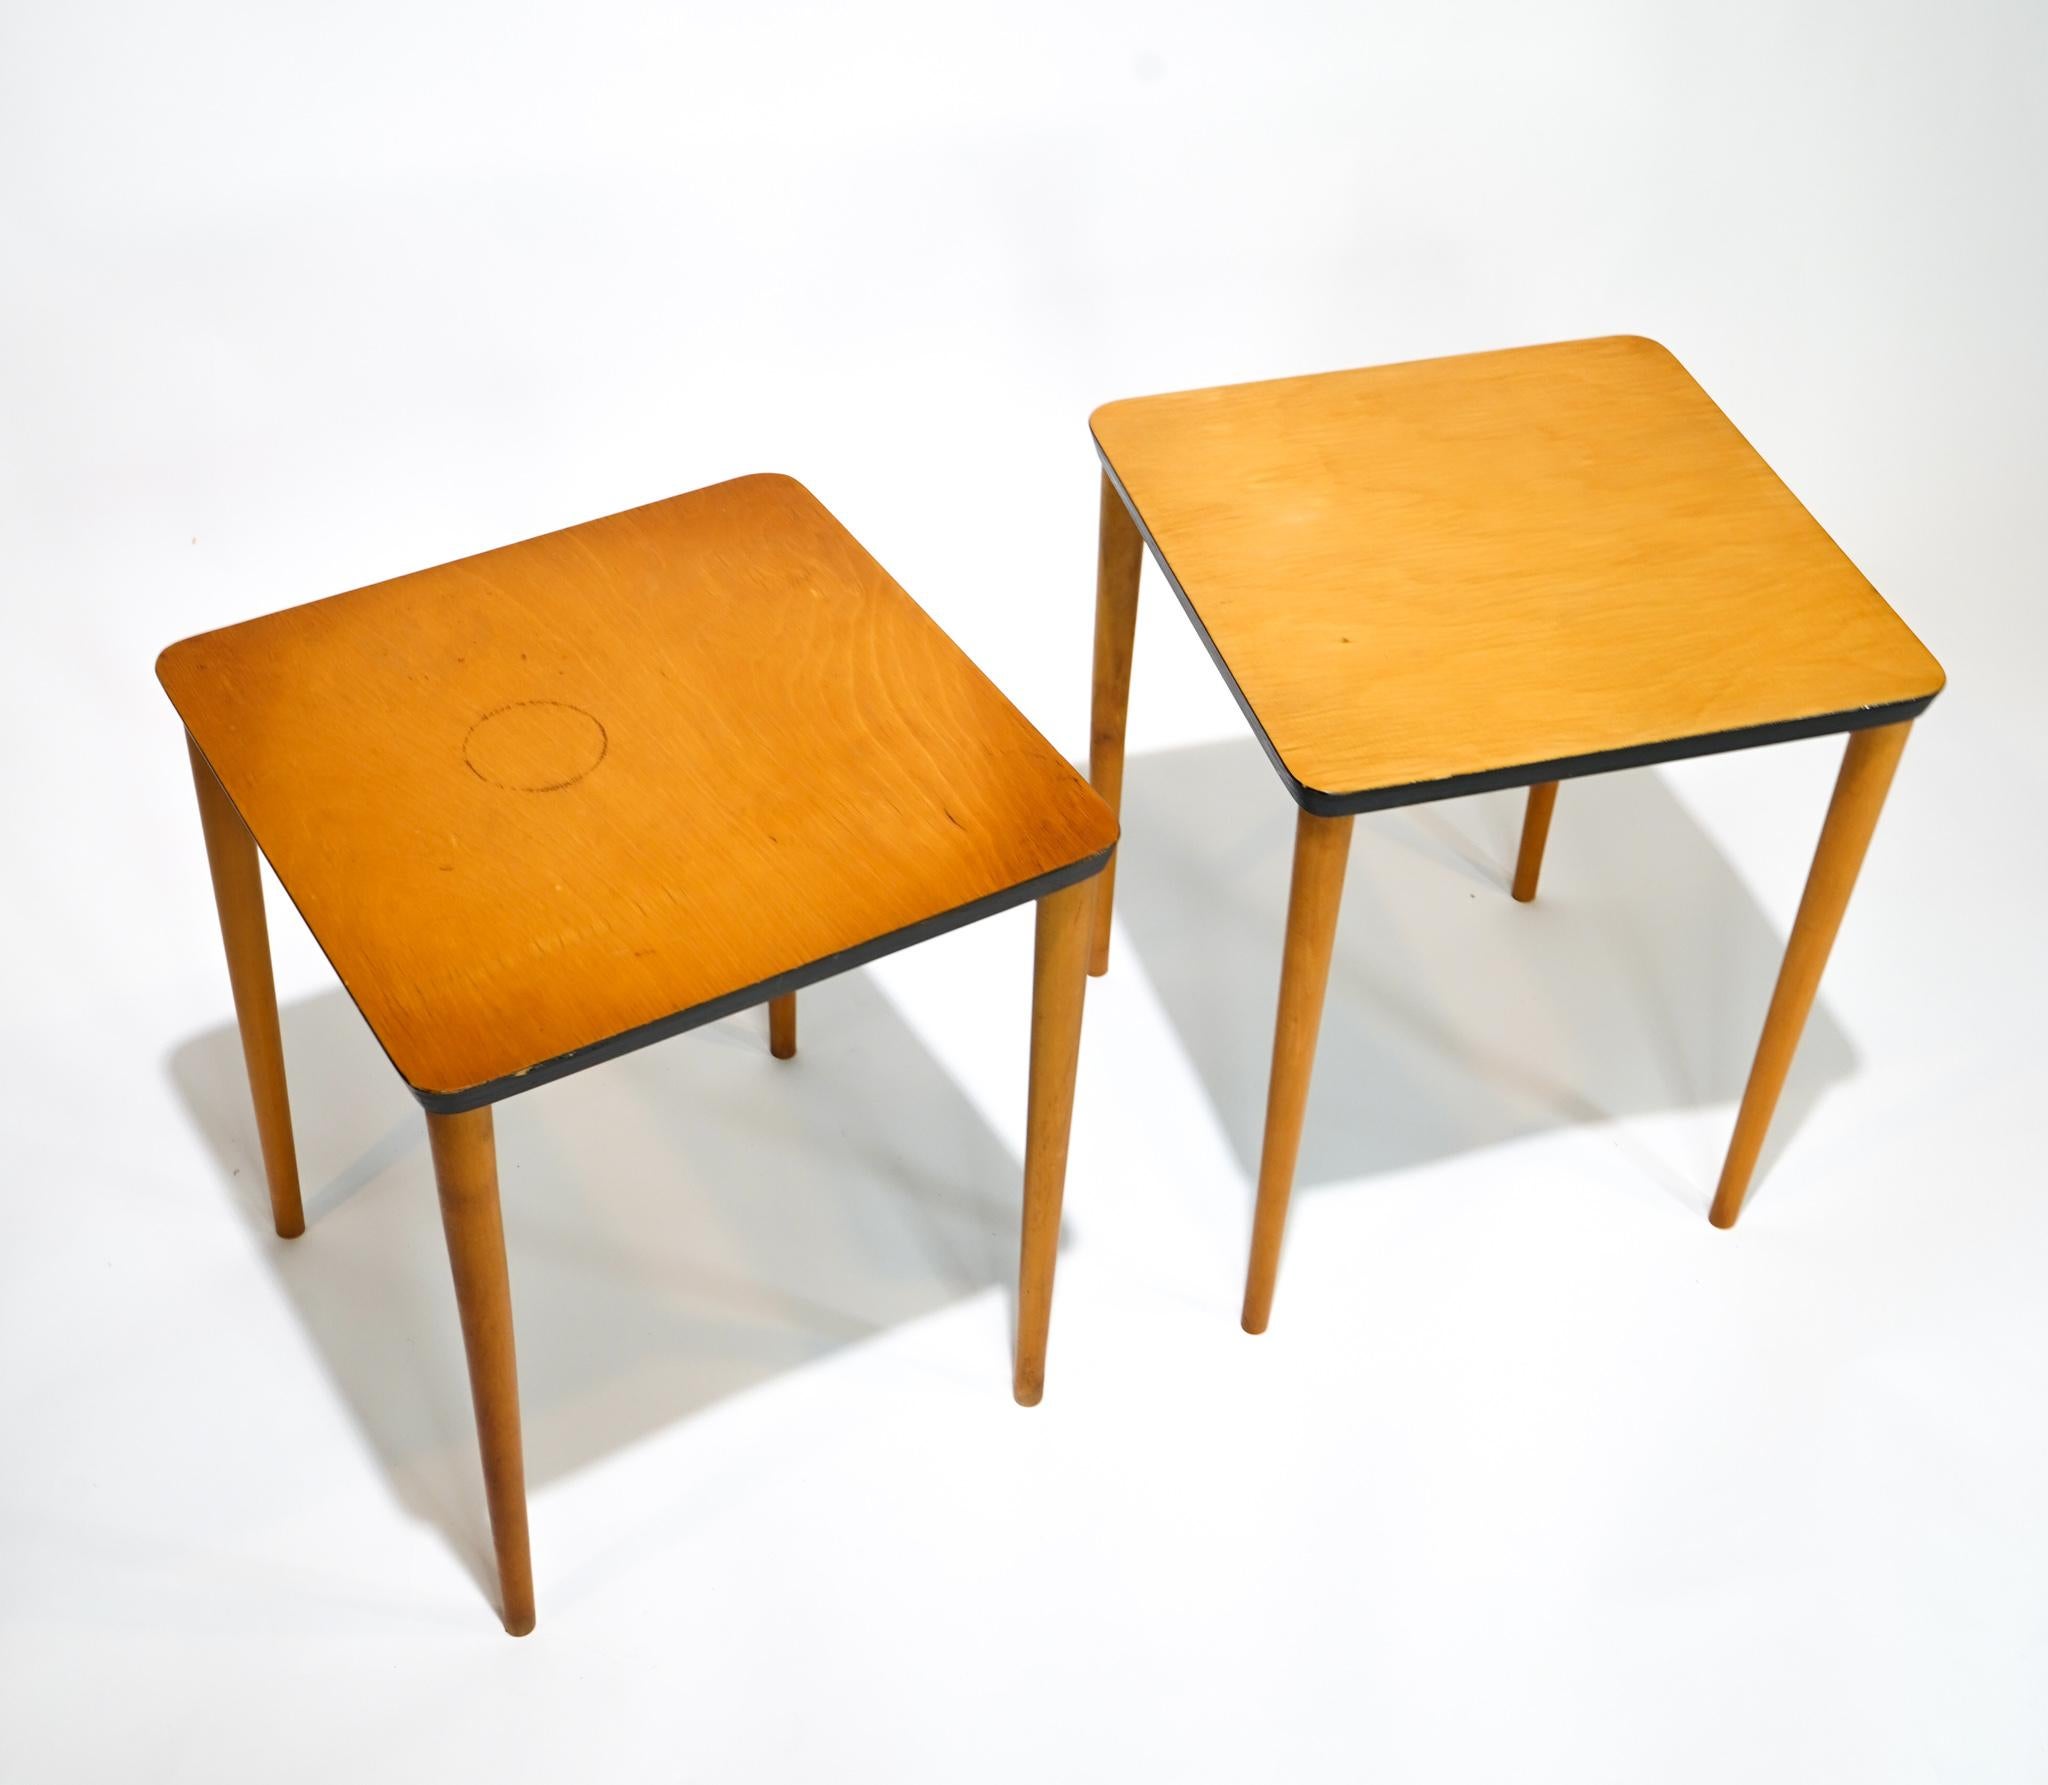 Fran Hosken wood side tables. A rare set of vintage Francis Hosken stackable side tables in all original condition. The wooden tapered legs screw in, making the tables easy to store and transport.